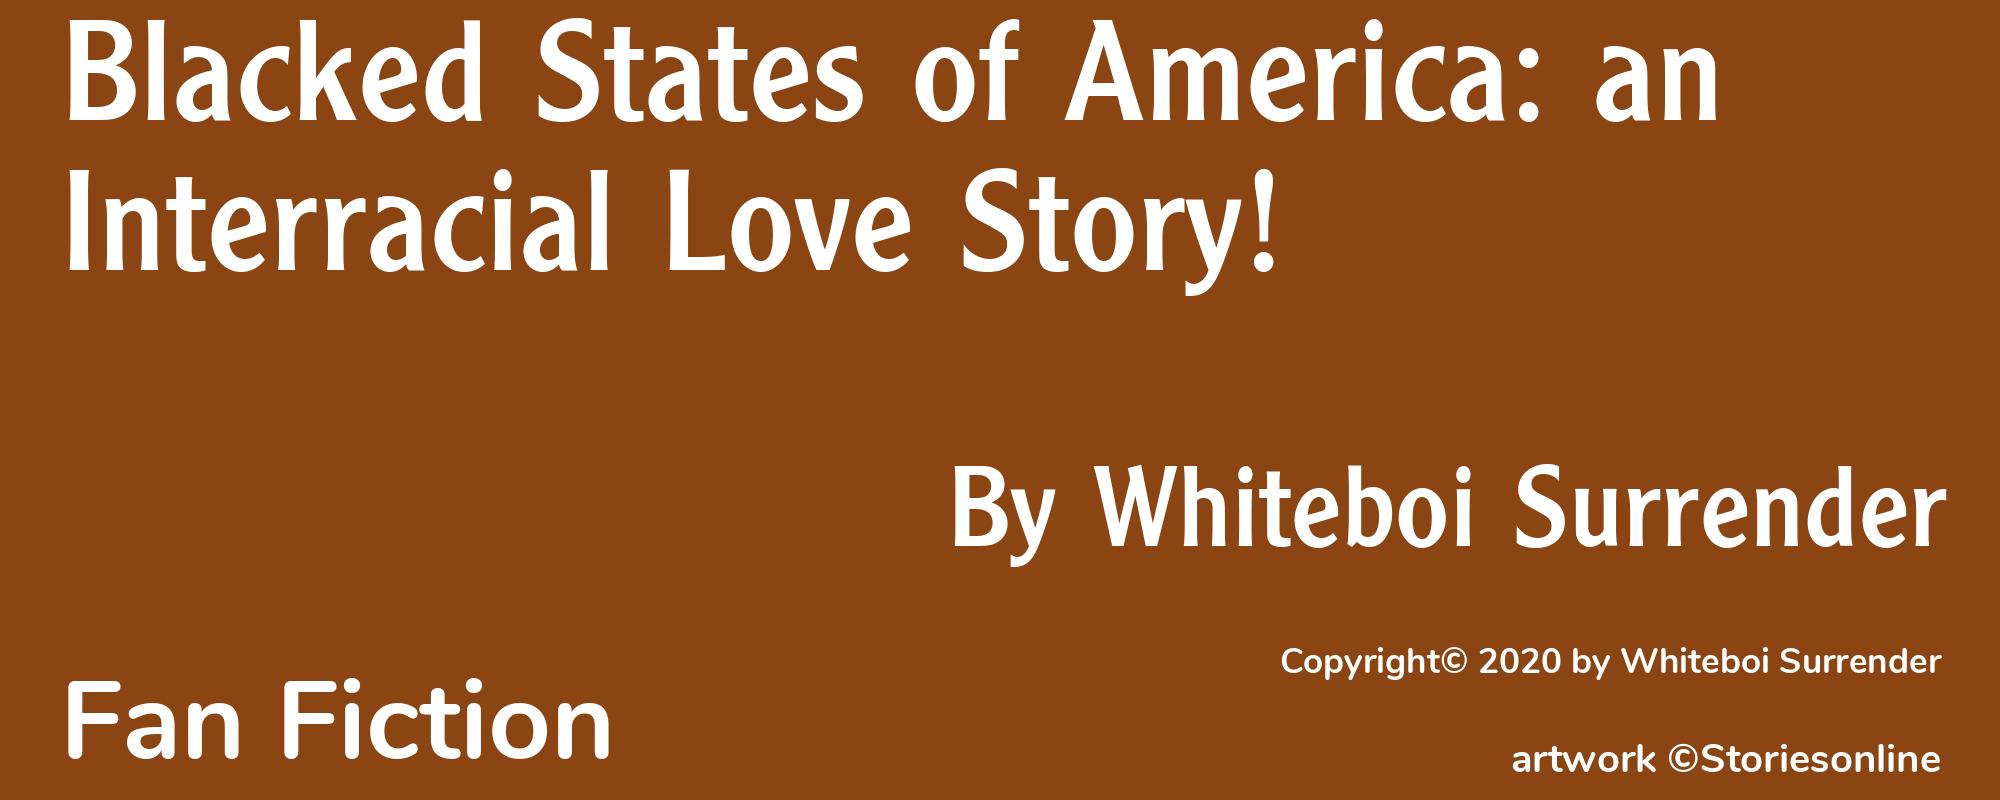 Blacked States of America: an Interracial Love Story! - Cover